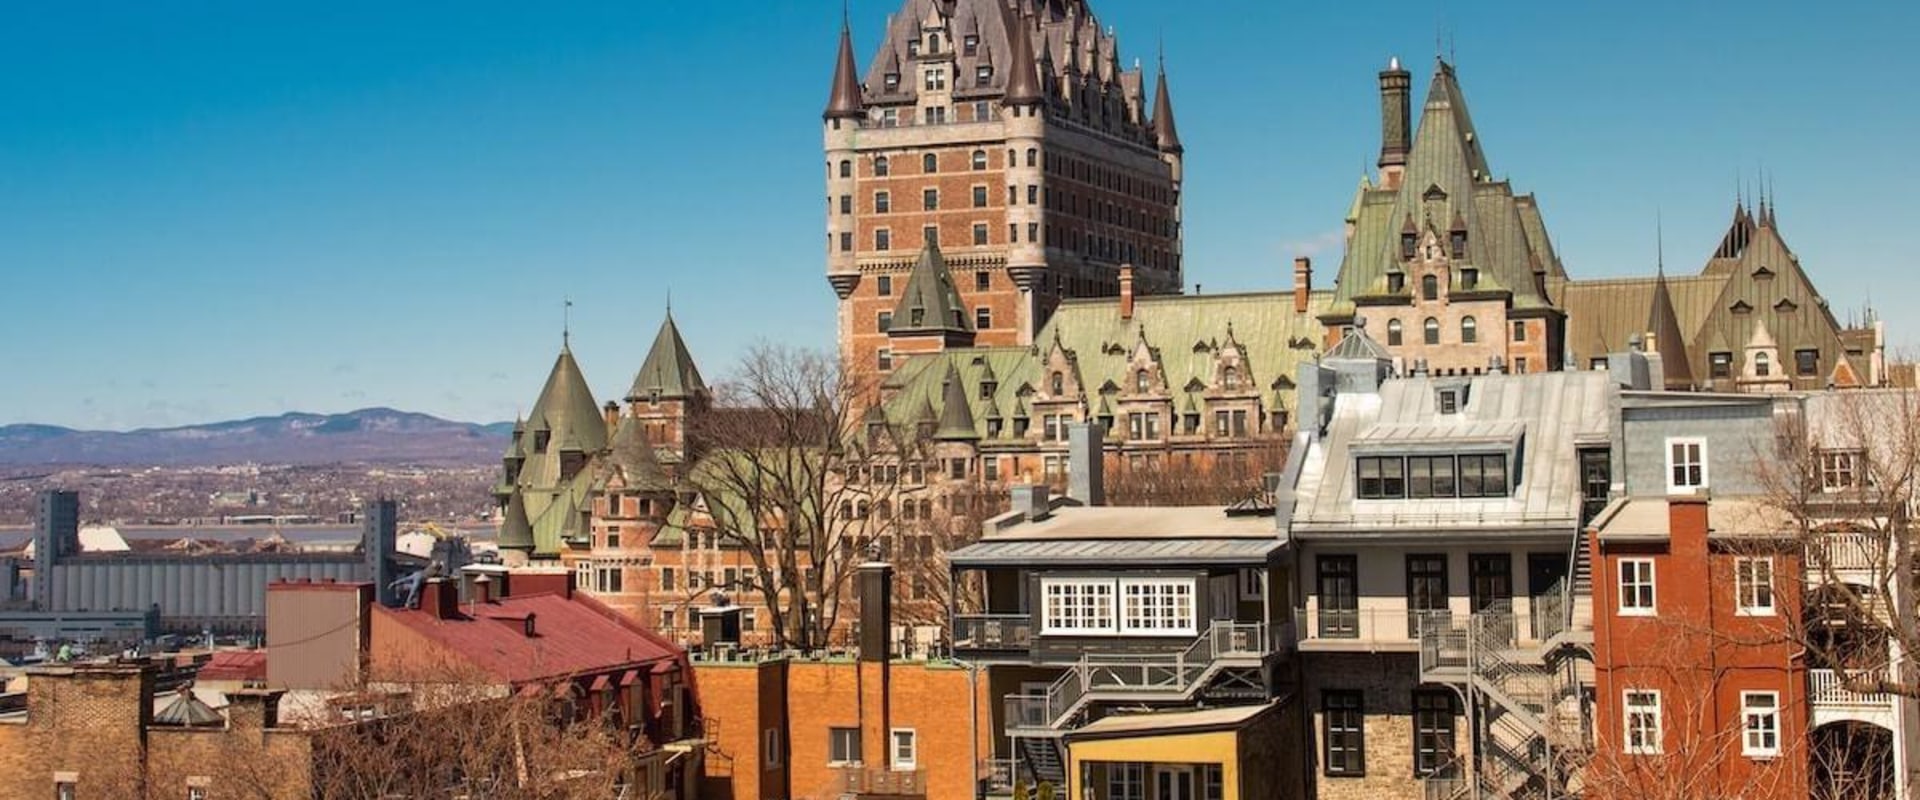 How many days should you stay in quebec city?